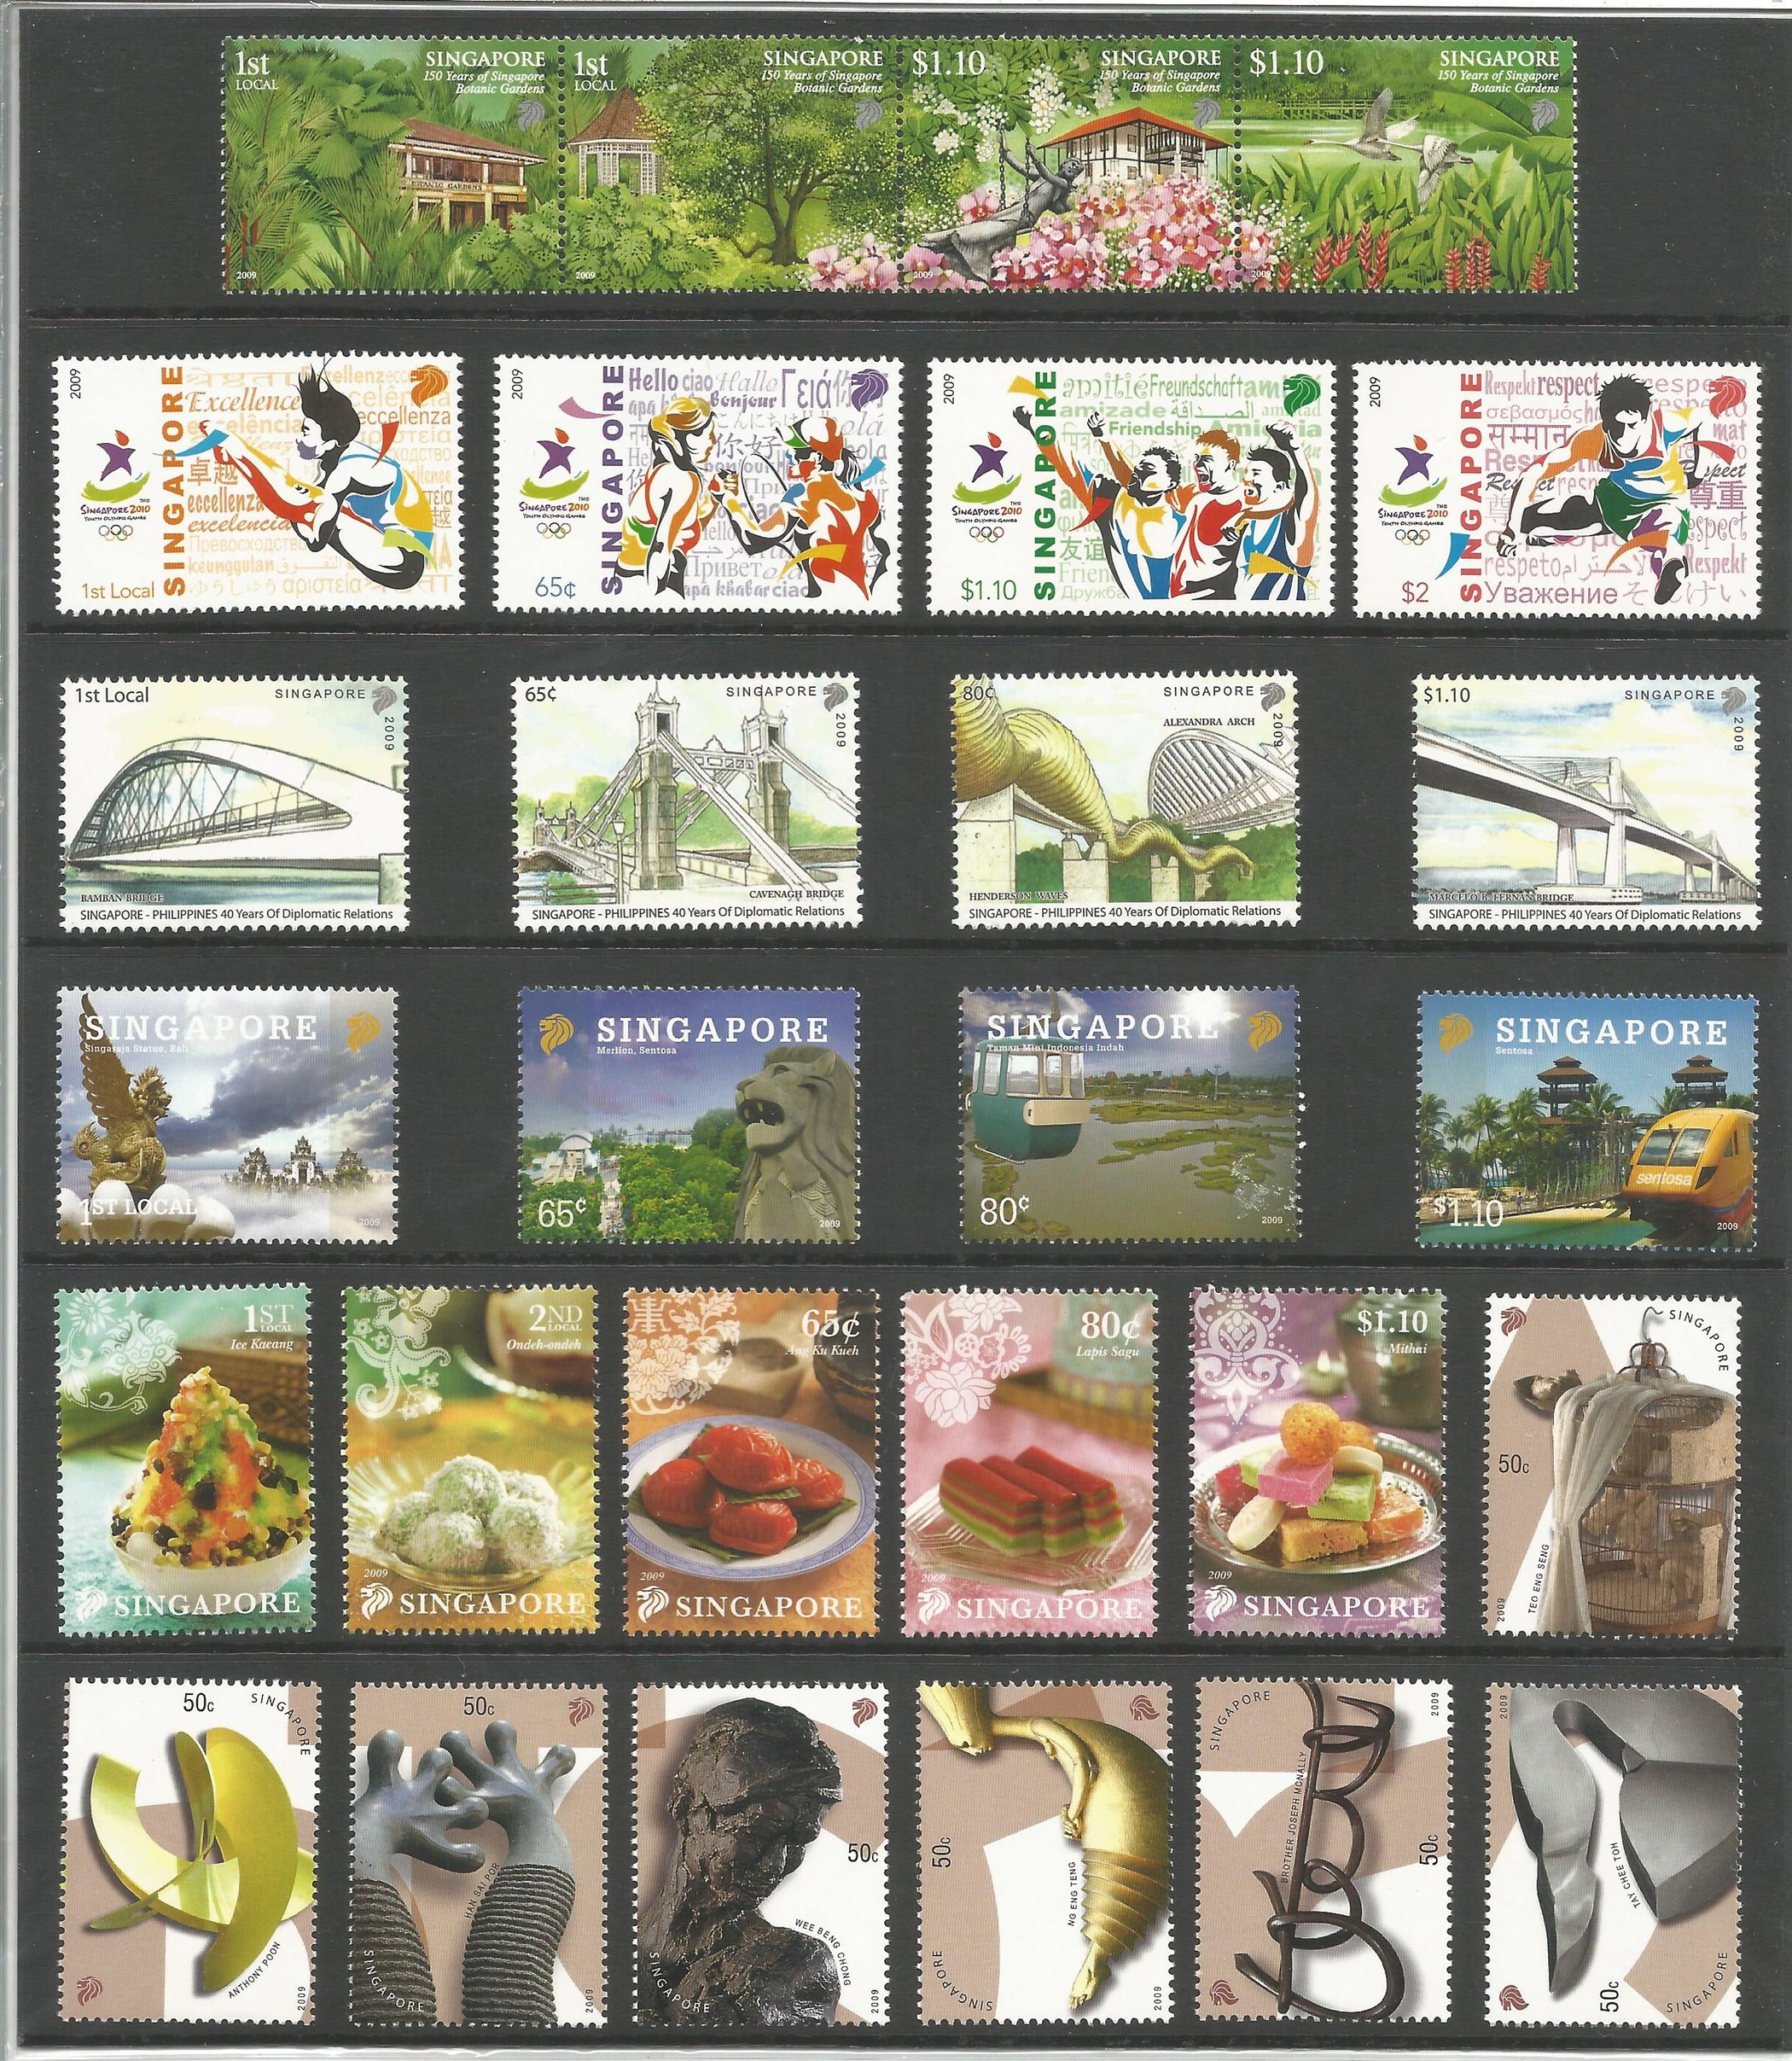 Singapore 2009 presentation book of stamps in slipcase. Unmounted mint stamps. Good condition. We